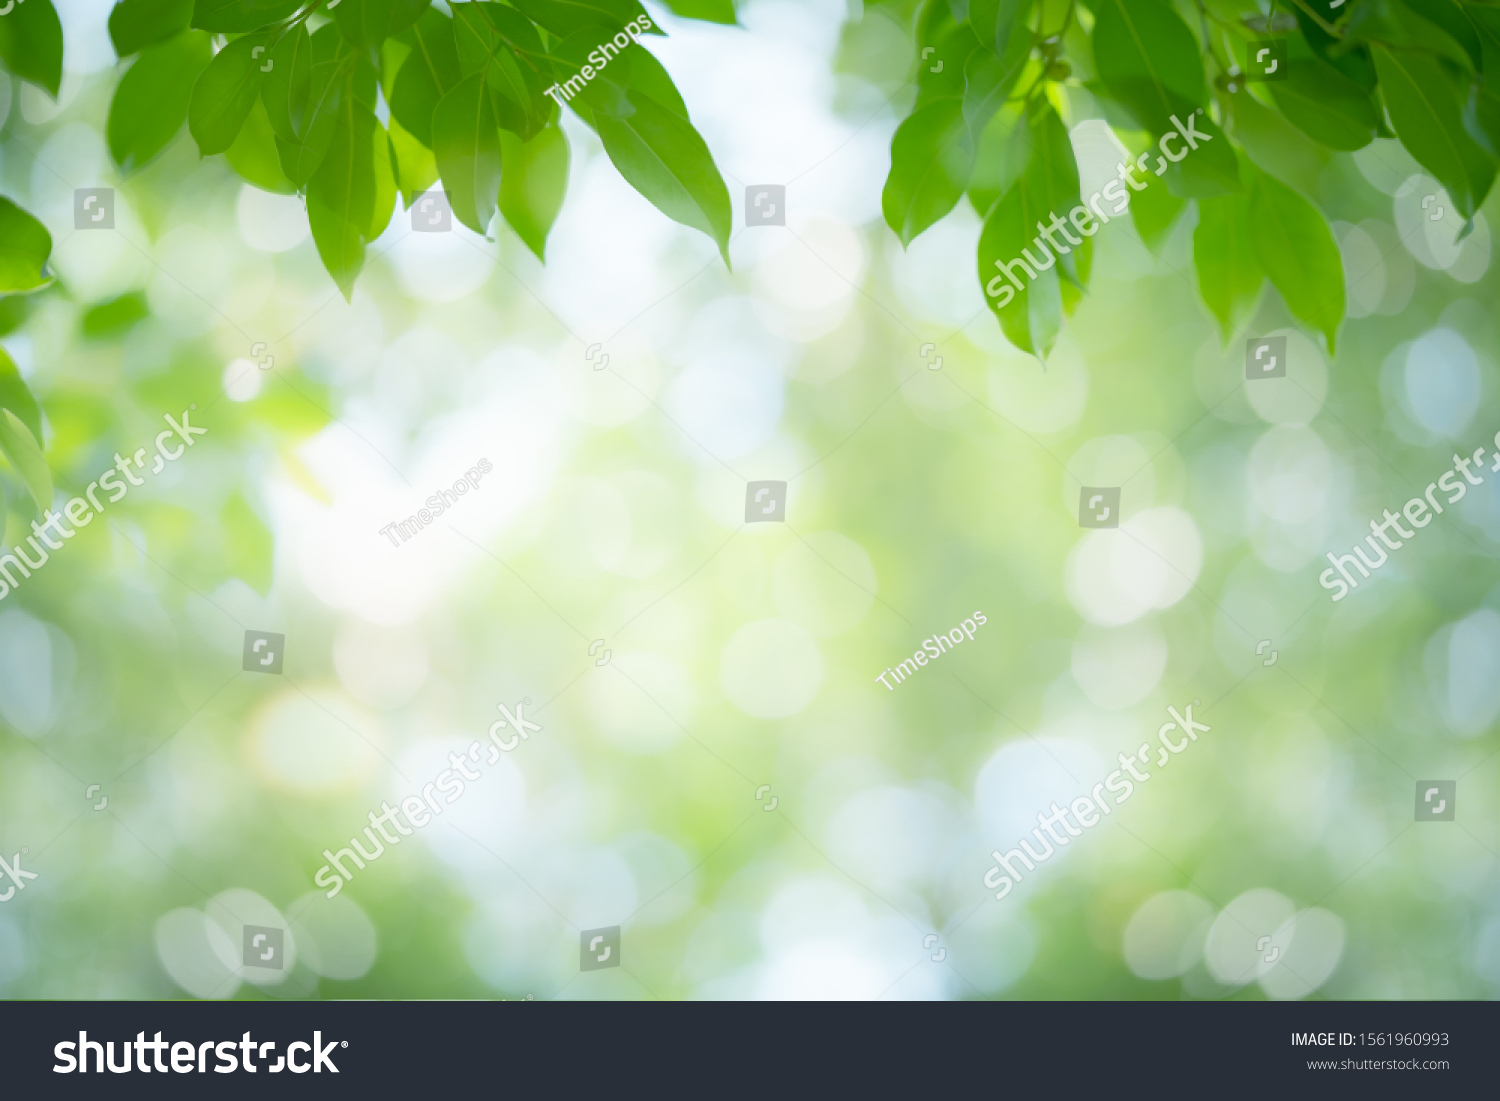 Green leaf nature on blurred greenery background. Beautiful leaf texture in sunlight. Natural background. close-up of macro with copy space for text. #1561960993